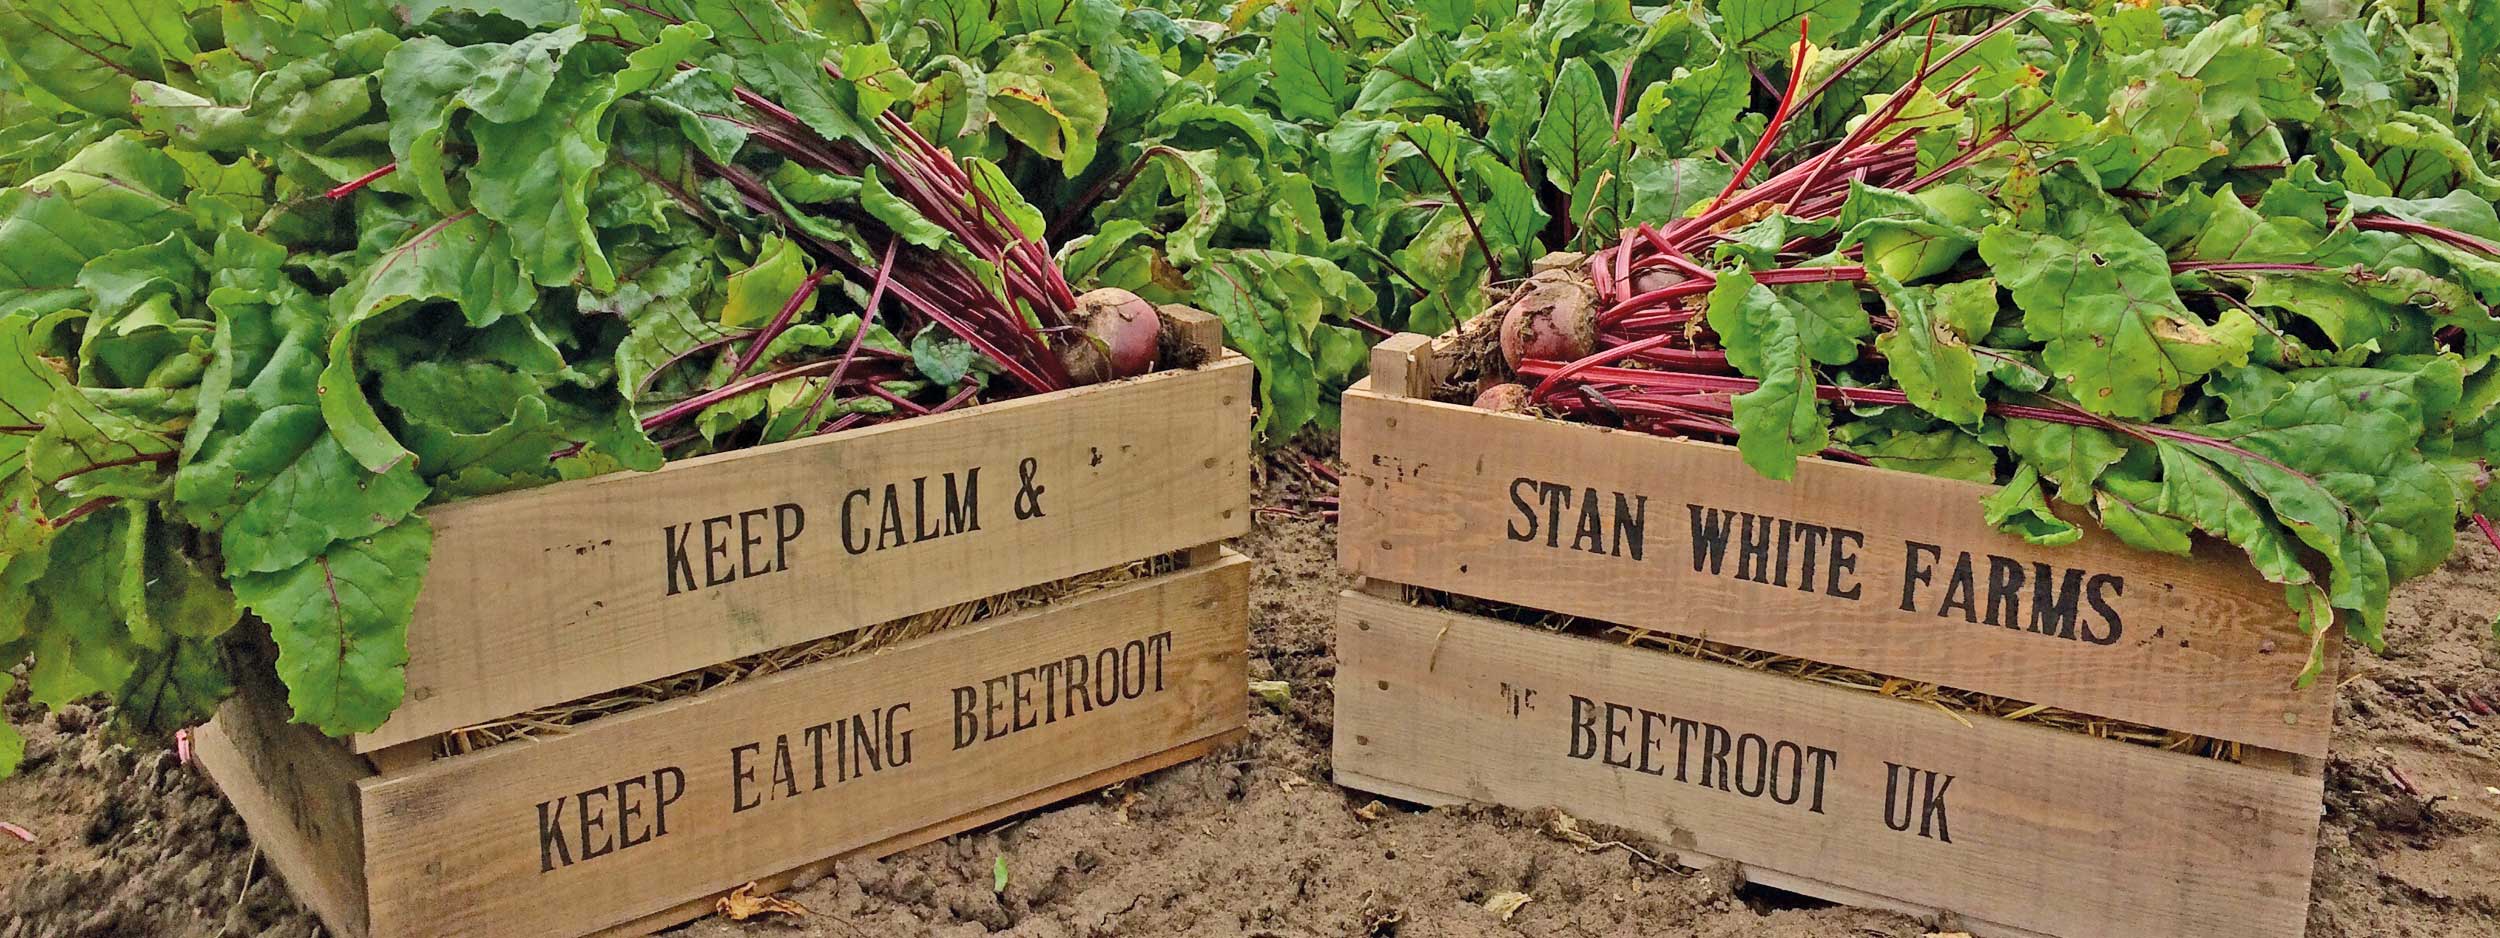 one of Britains largest beetroot suppliers in the UK